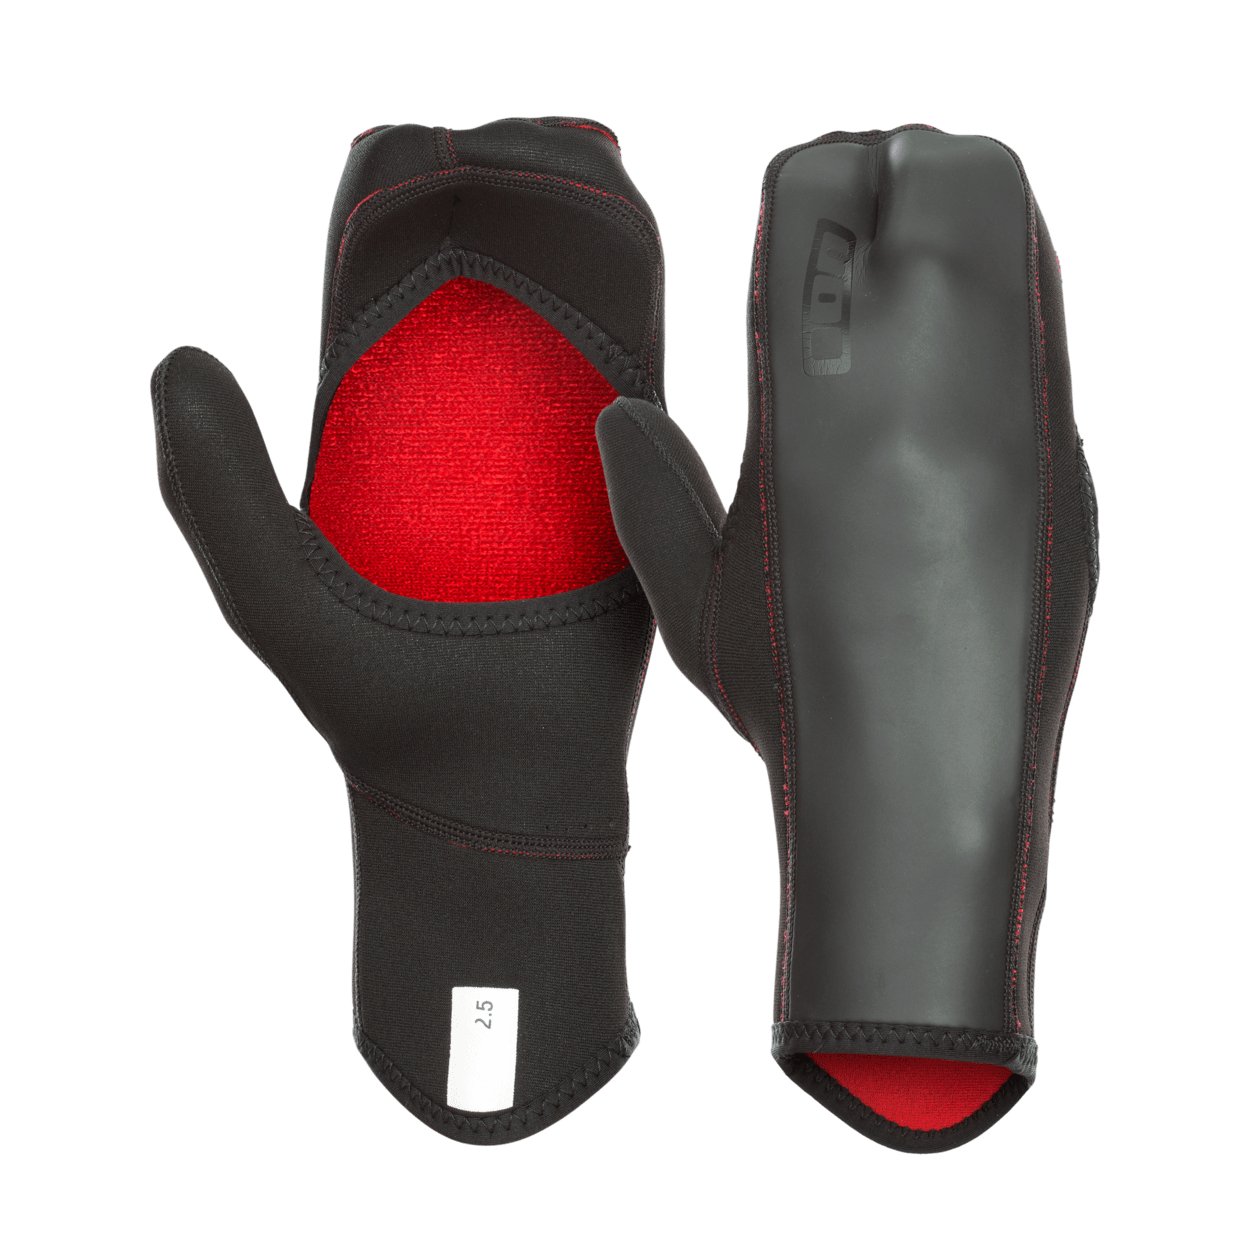 ION Open Palm Mitten 2.5 2022 - Worthing Watersports - 9008415883110 - Neo Accessories - ION Water